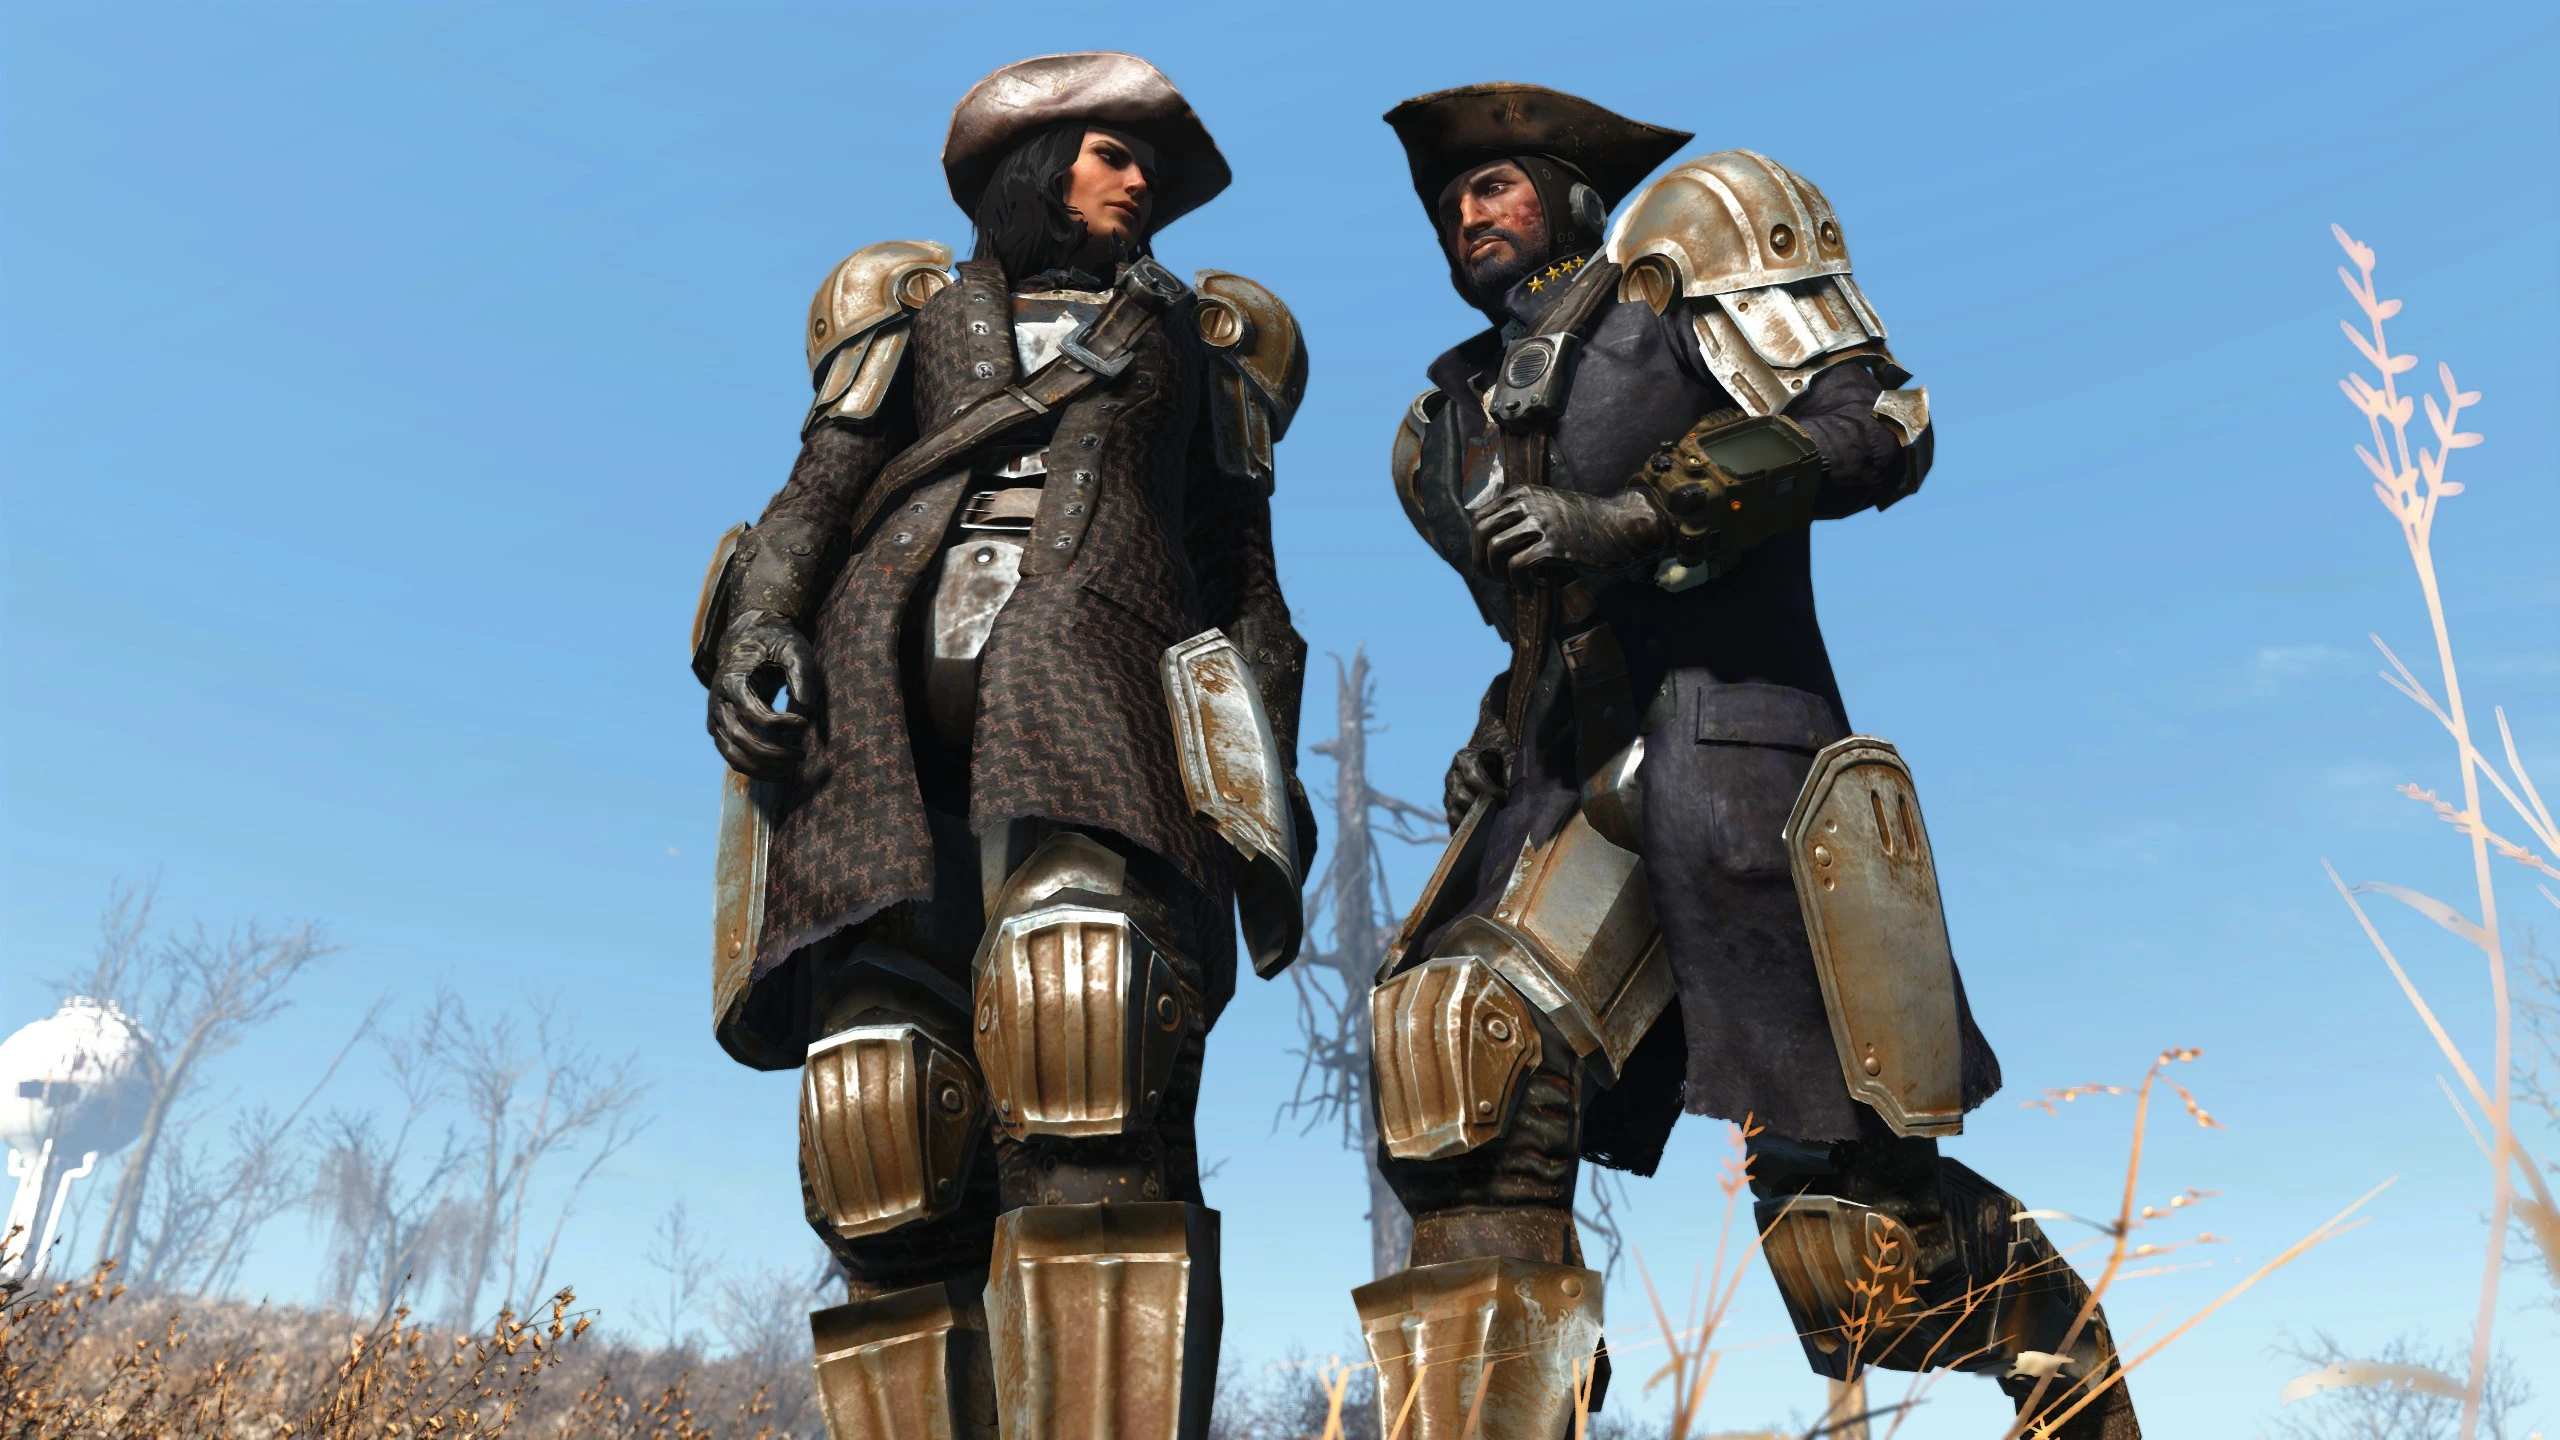 Militarized minutemen at fallout 4 фото 72